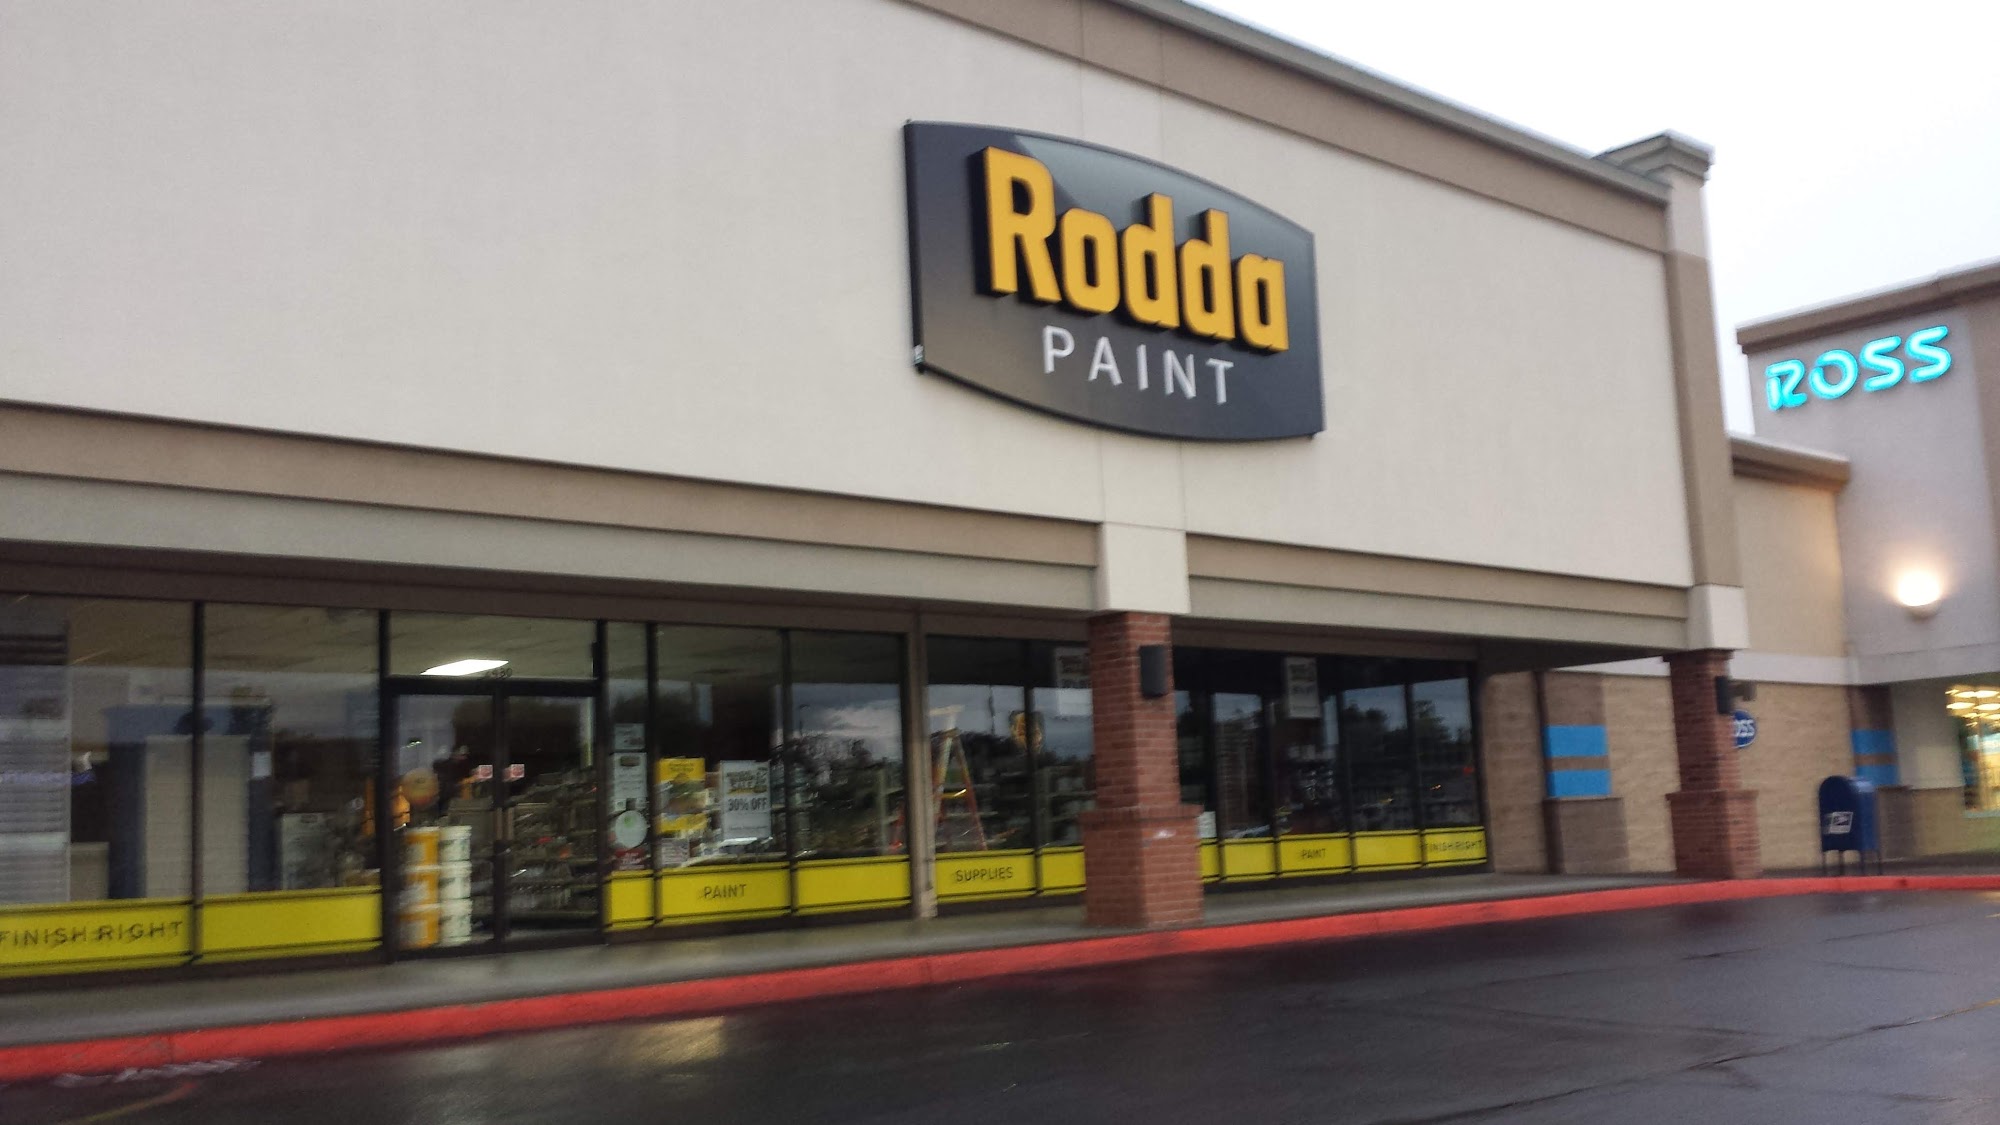 Rodda Paint Co. - McMinnville